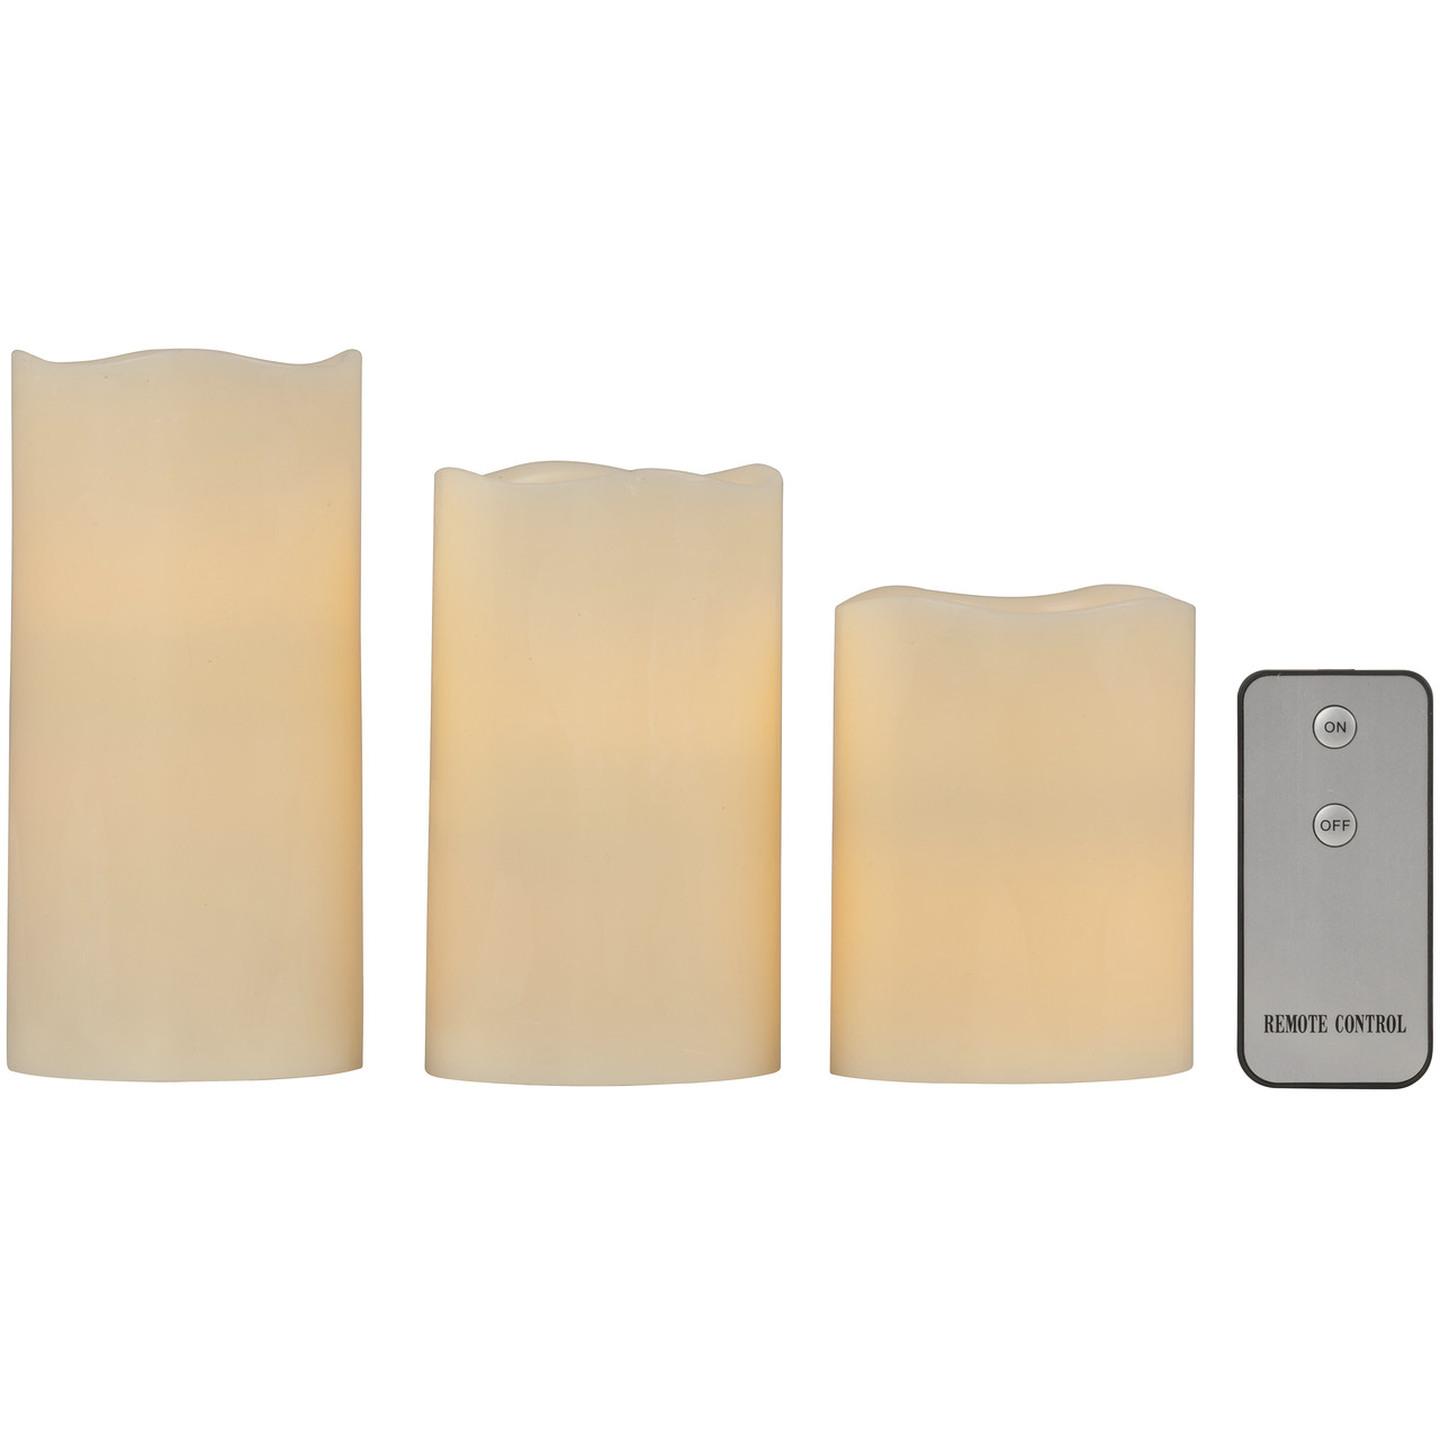 LED Candle Set with Remote Control